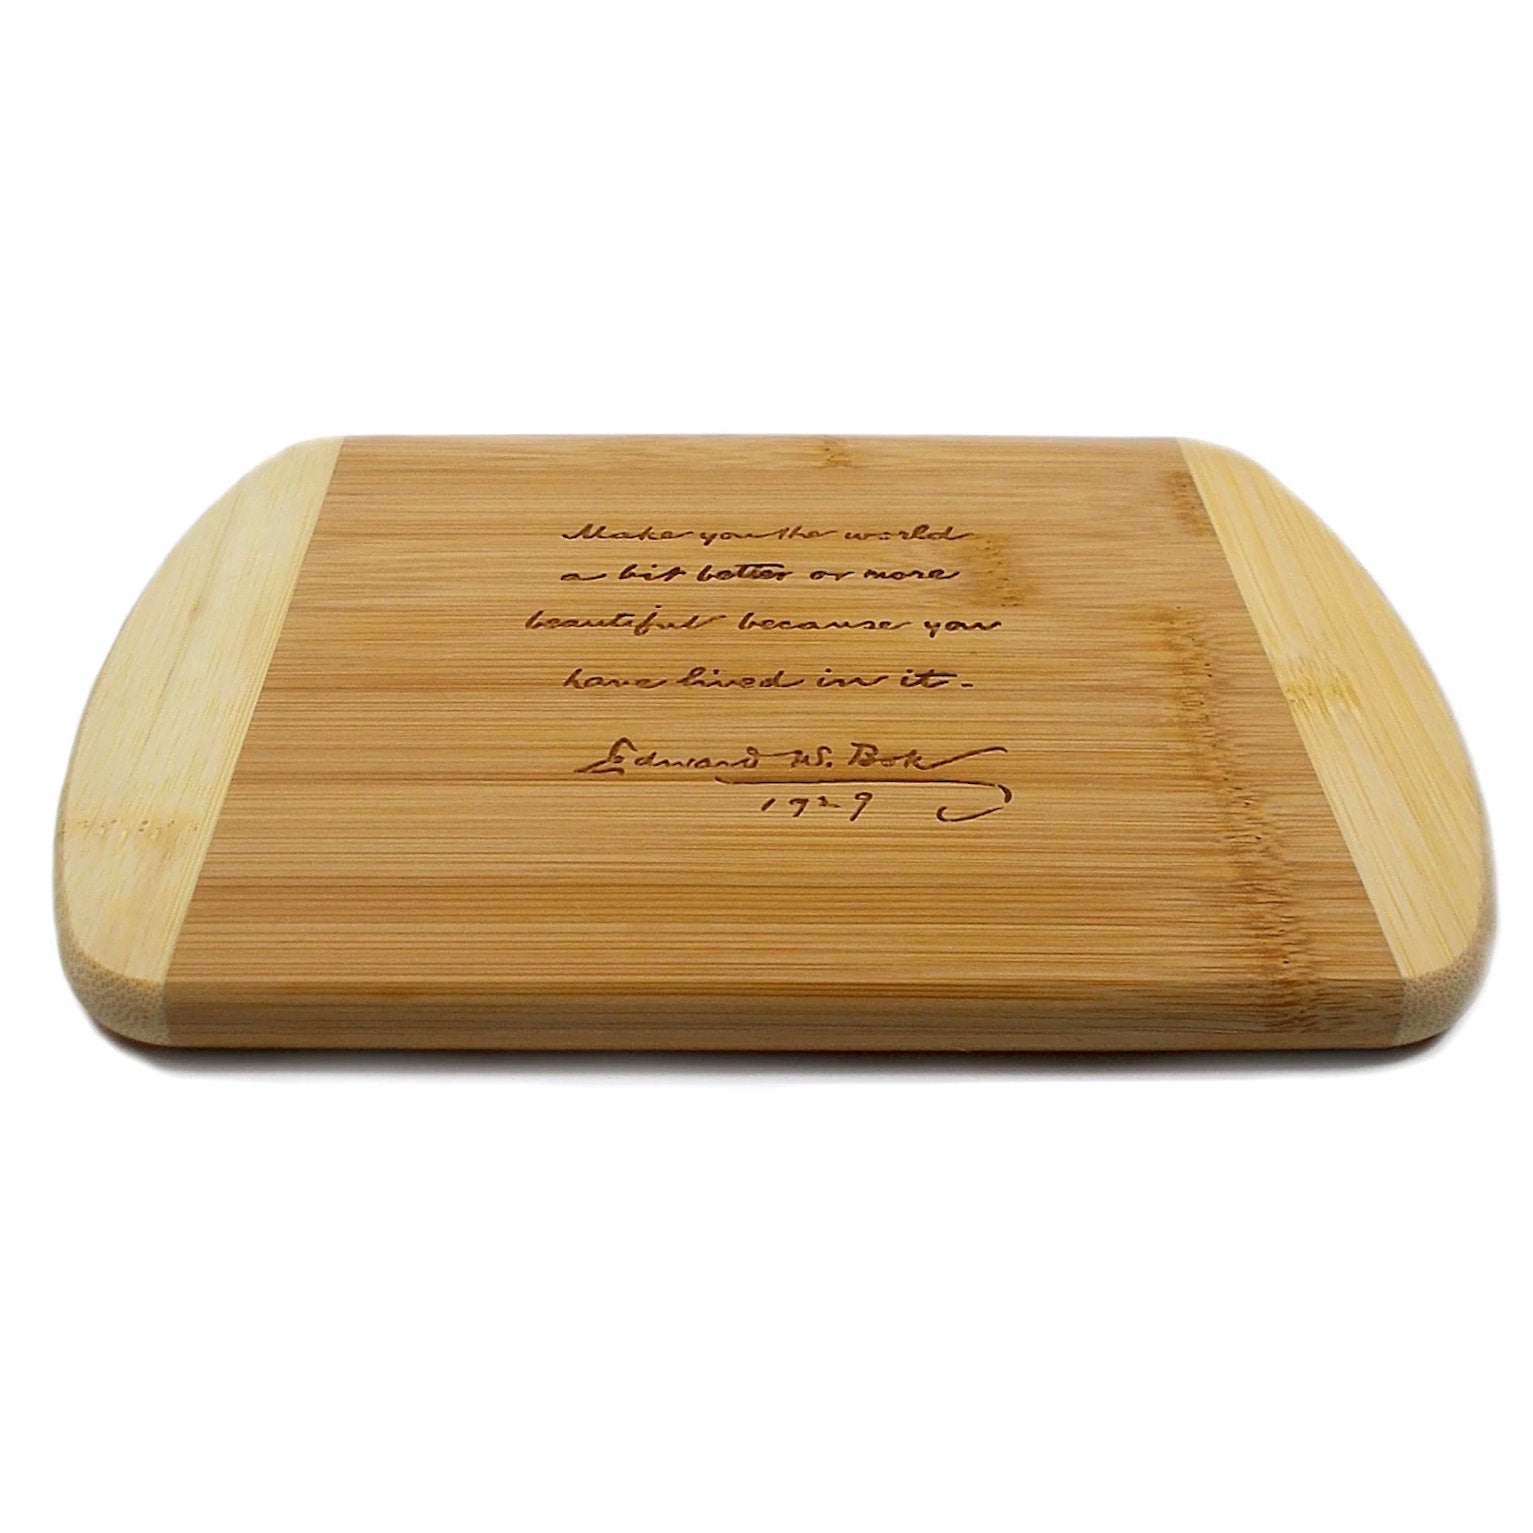 Make some beautiful chopping boards / bread boards / serving boards 